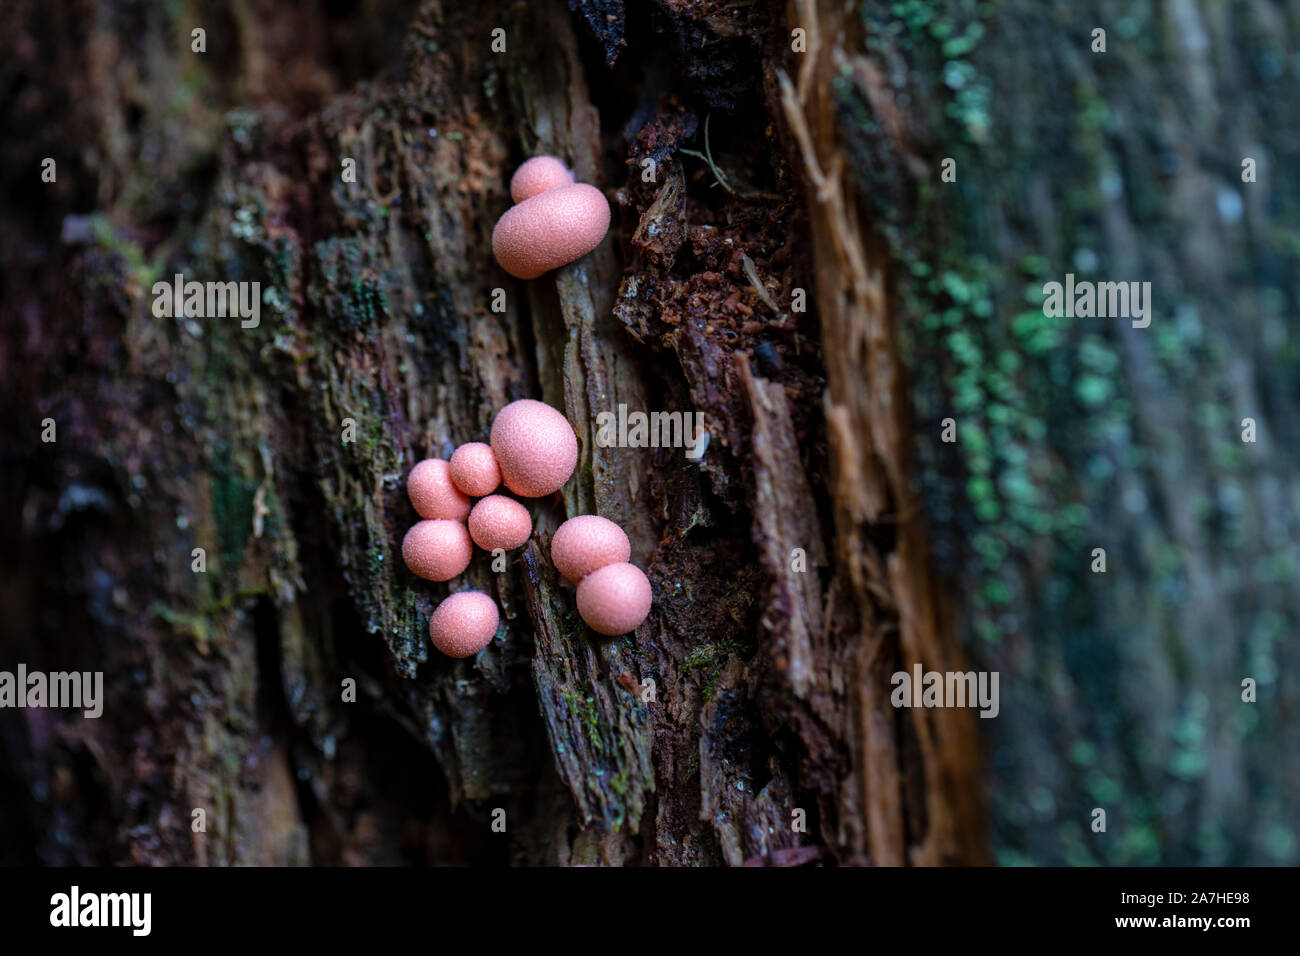 Lycogala epidendrum, commonly known as wolf's milk or groening's slime - Pisgah National Forest, Brevard, North Carolina, USA Stock Photo